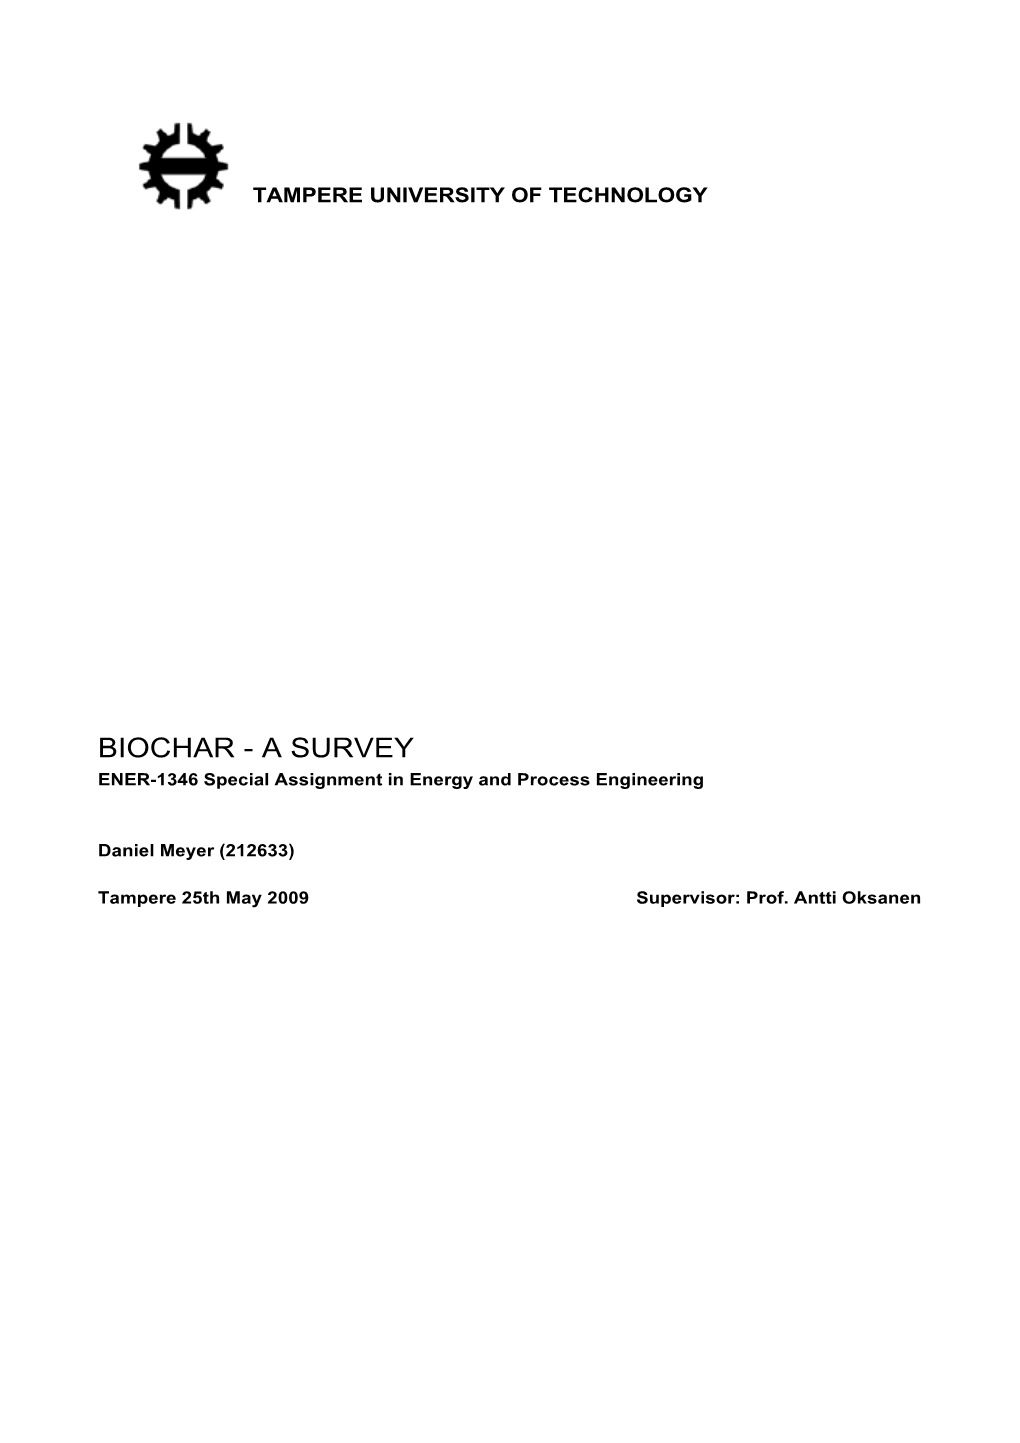 BIOCHAR - a SURVEY ENER-1346 Special Assignment in Energy and Process Engineering